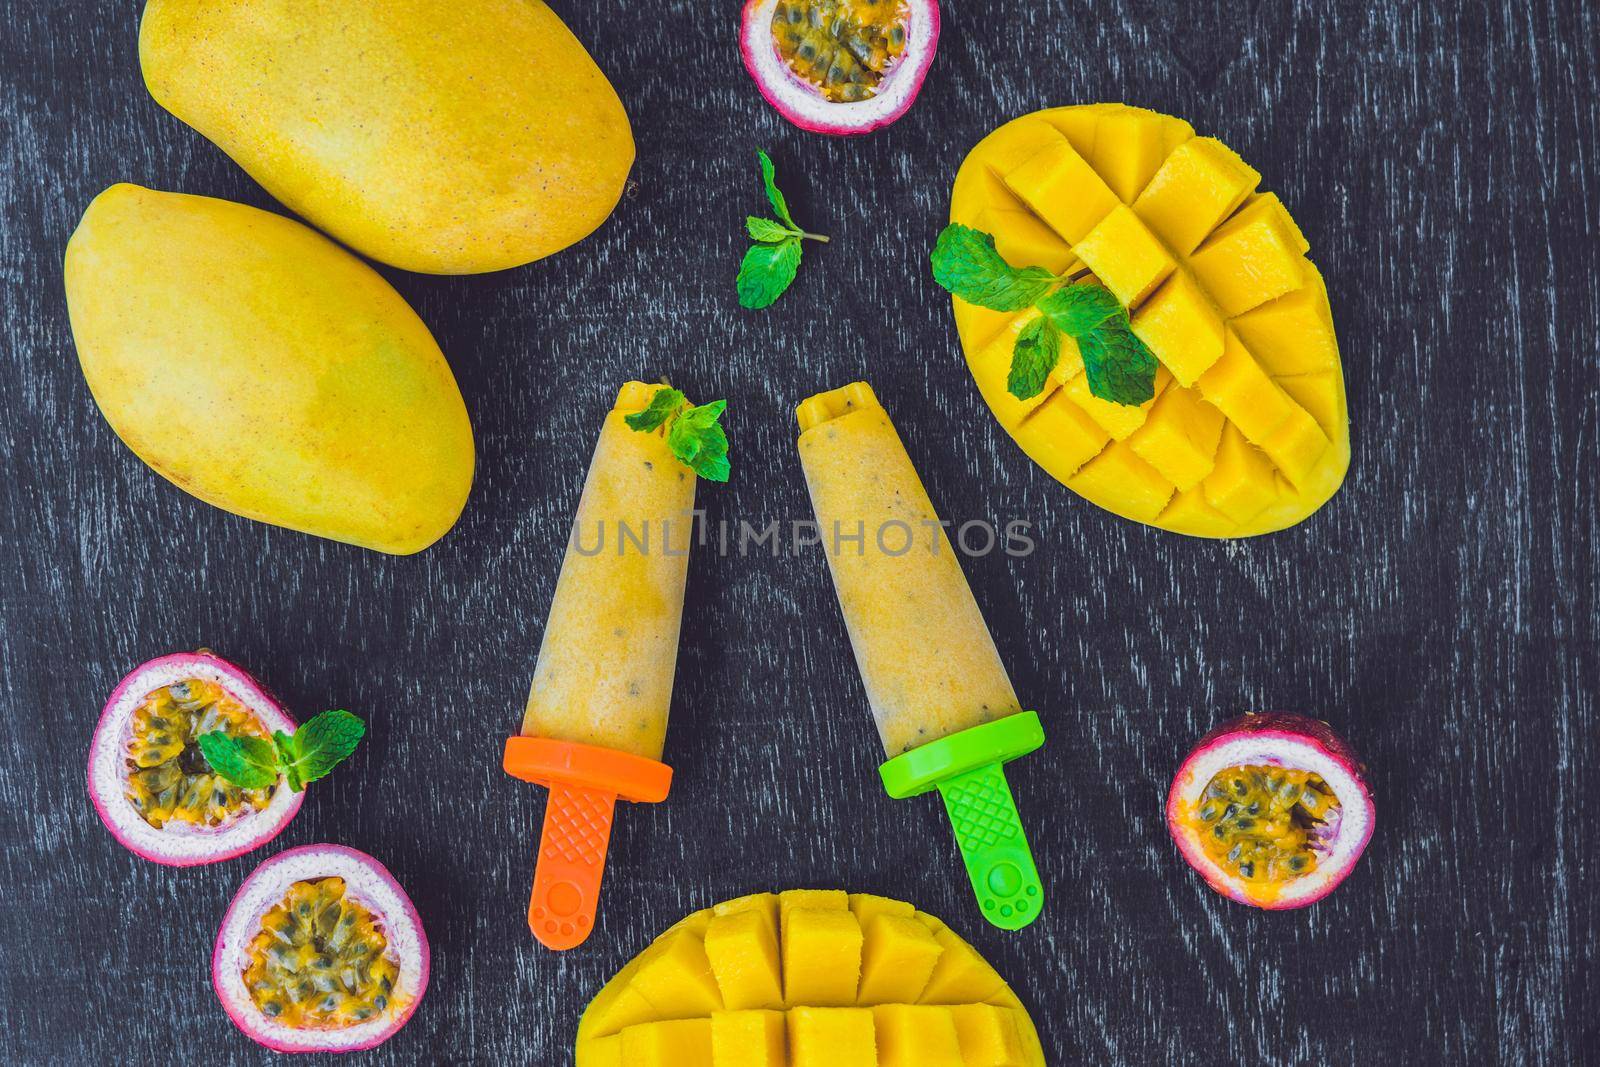 Homemade ice cream from mango and passion fruit. Popsicle by galitskaya